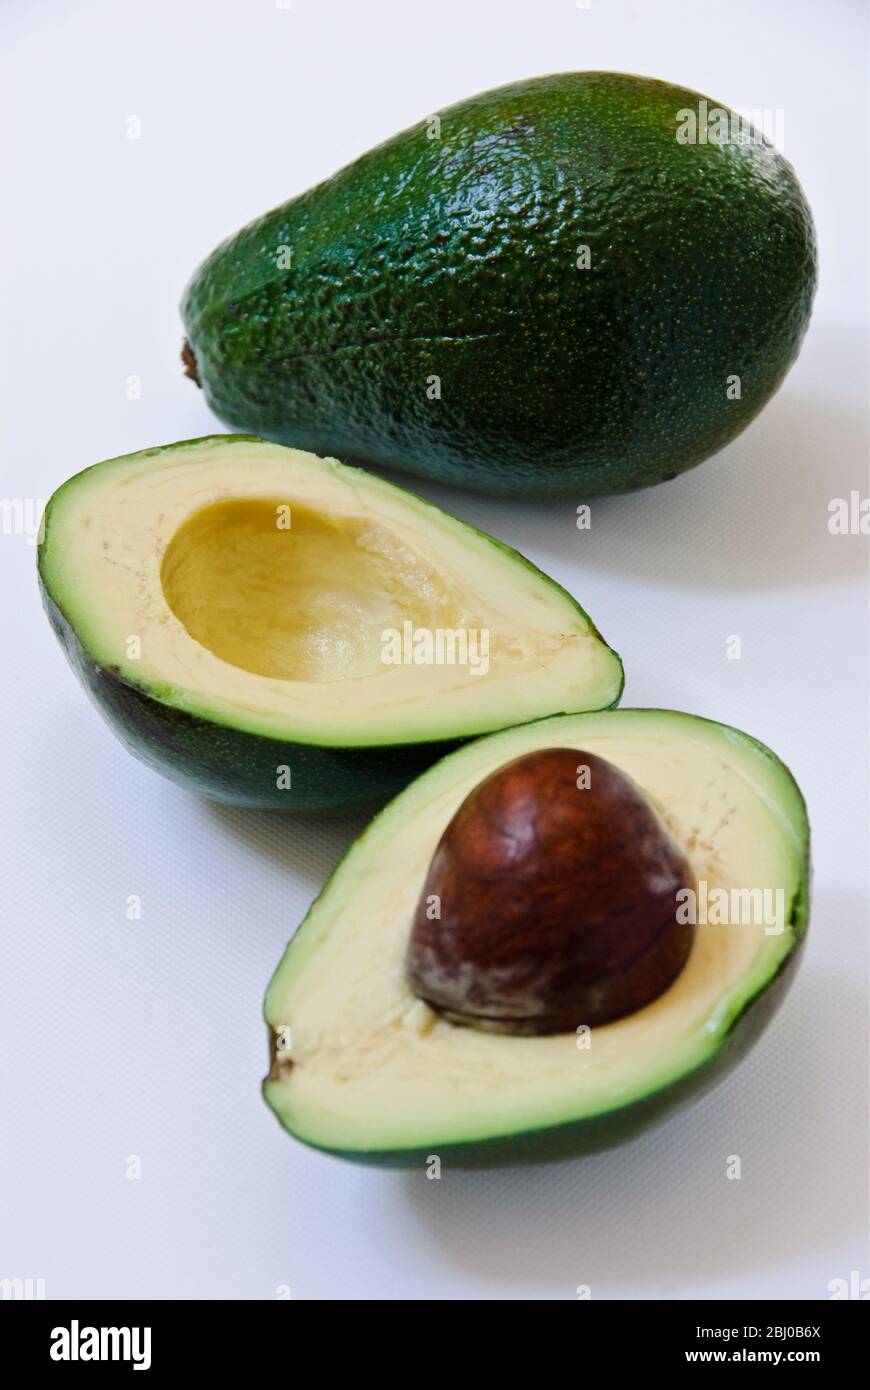 Whole and cut fresh avocado pear on white background - Stock Photo